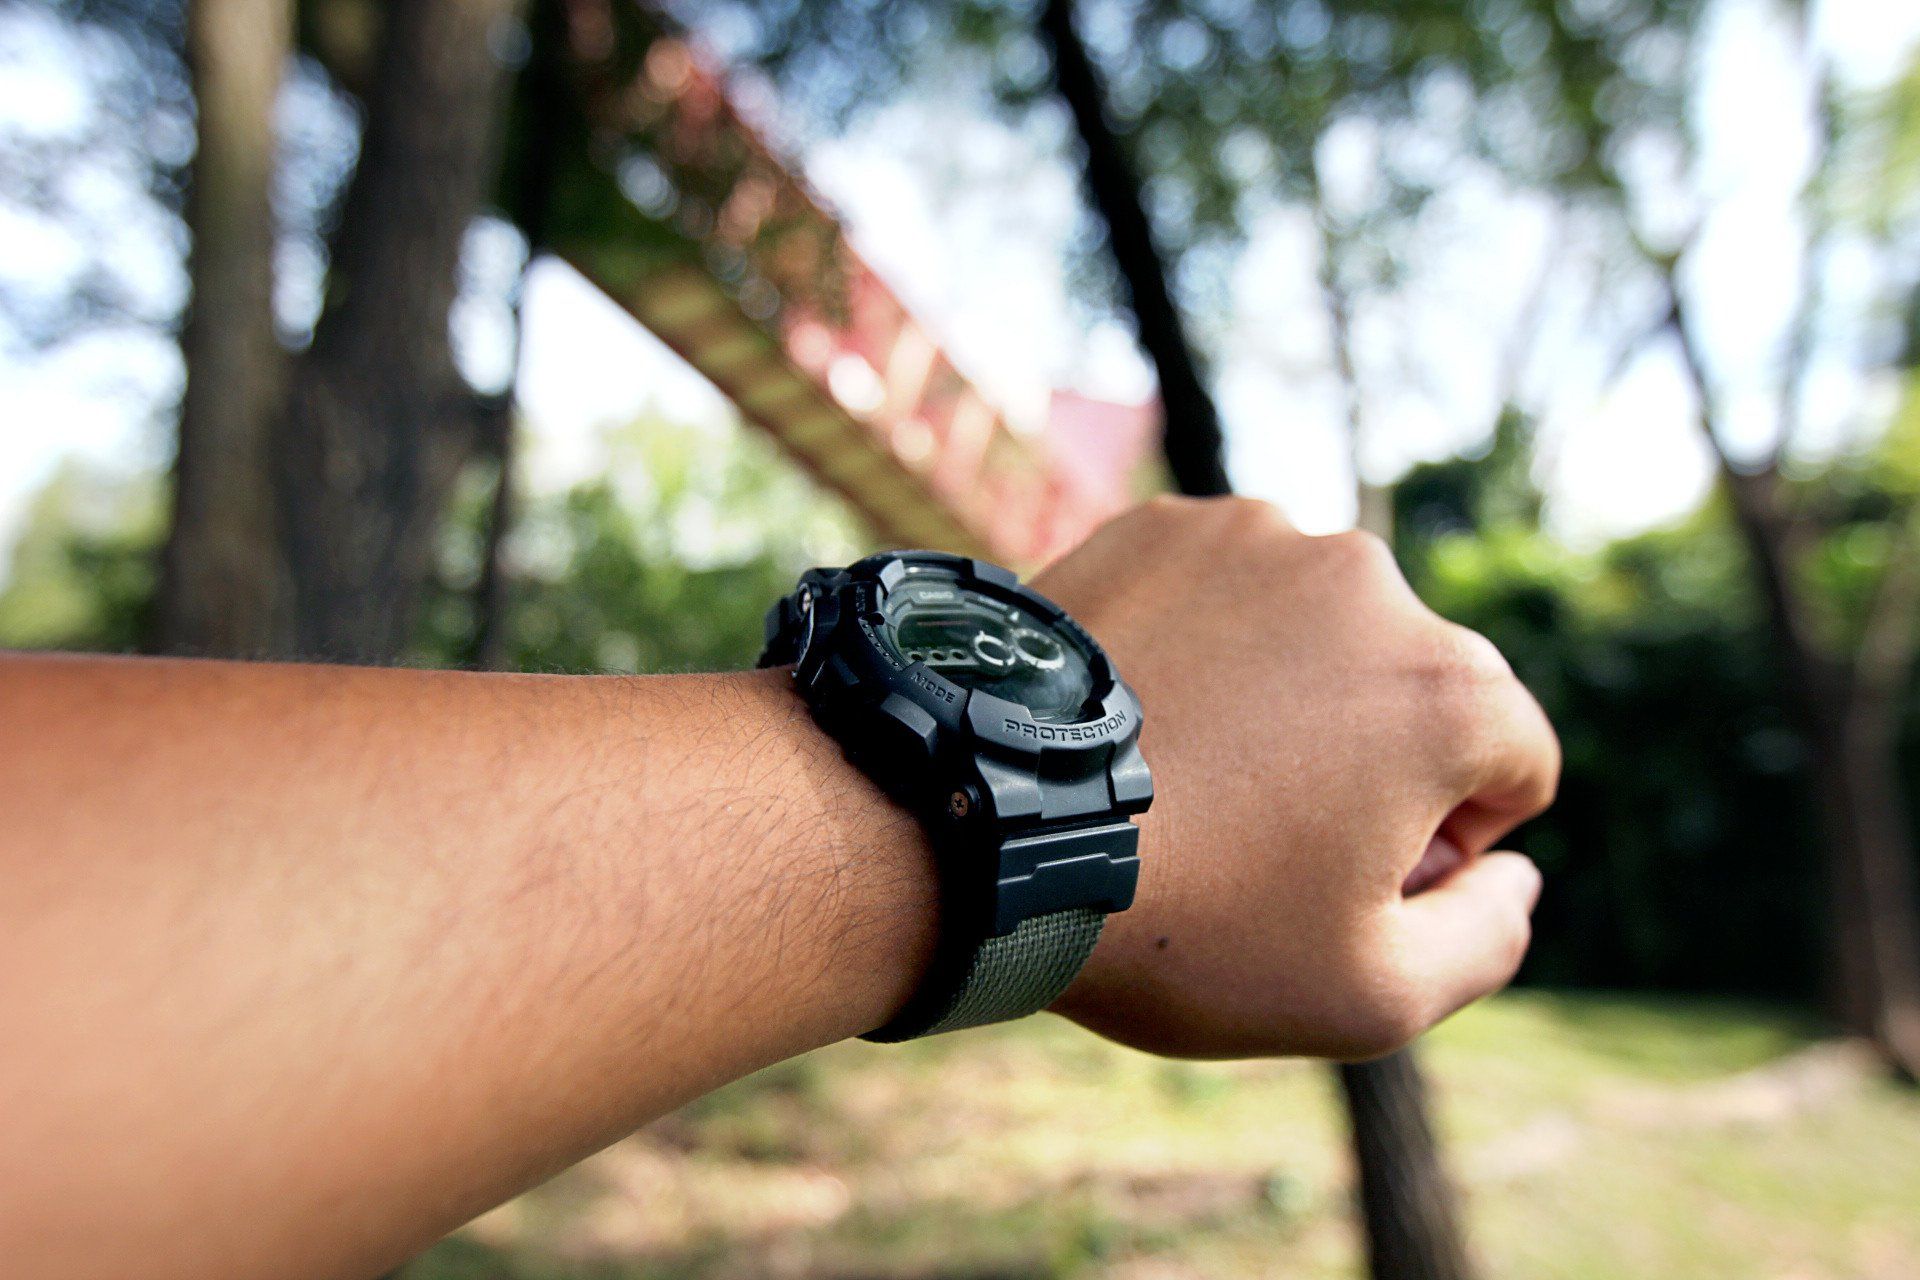 Transform your G-Shock with Vario's 24mm ballistic nylon straps and Casio's adapter